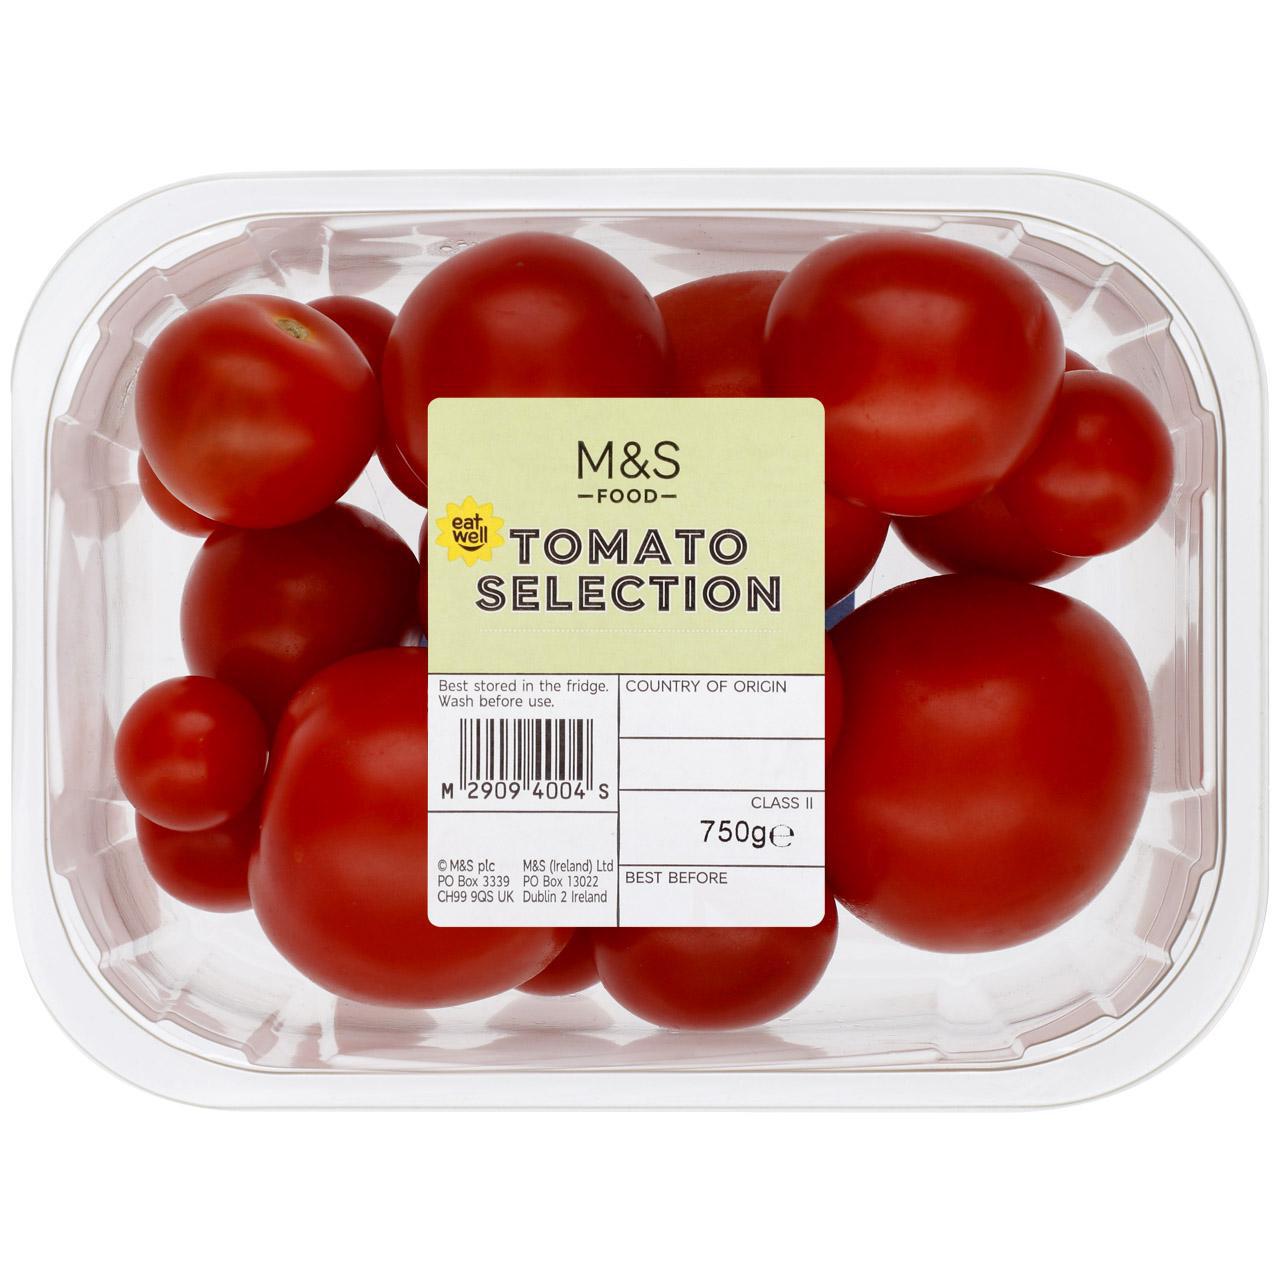 M&S Tomato Selection 750g